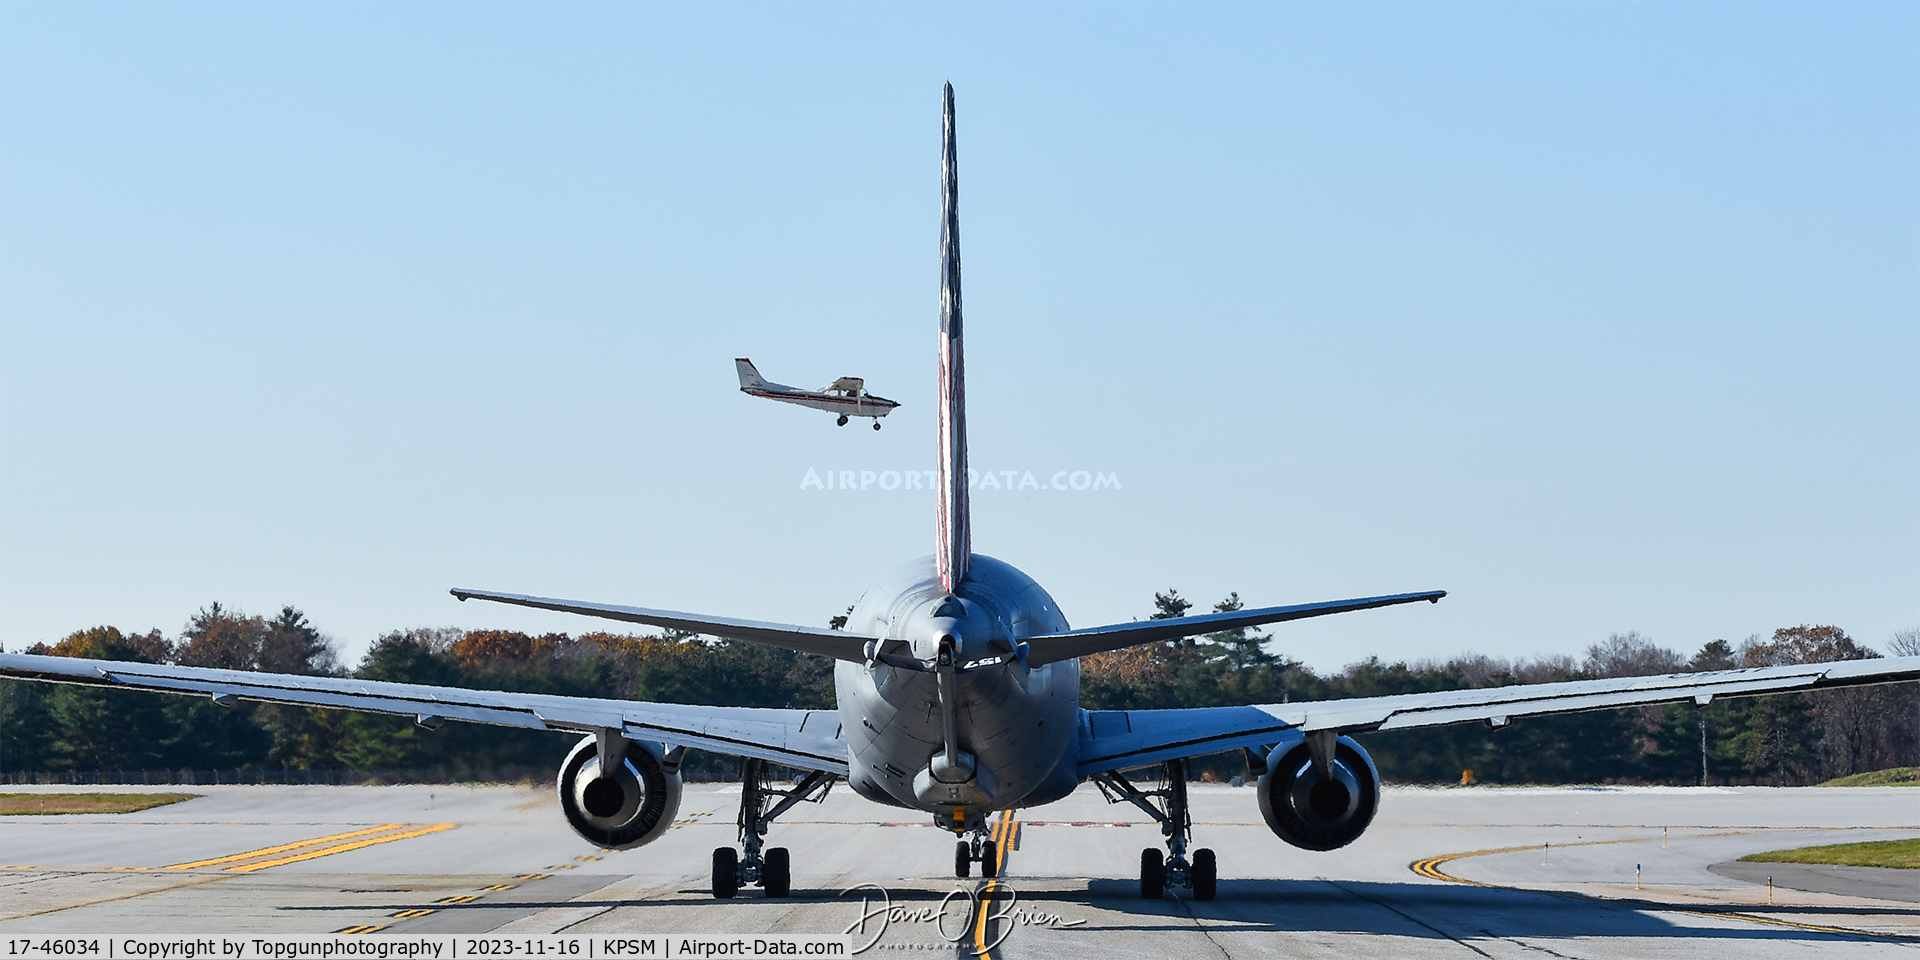 17-46034, 2018 Boeing KC-46A Pegasus C/N 34114, PACK92 holding short for RW34